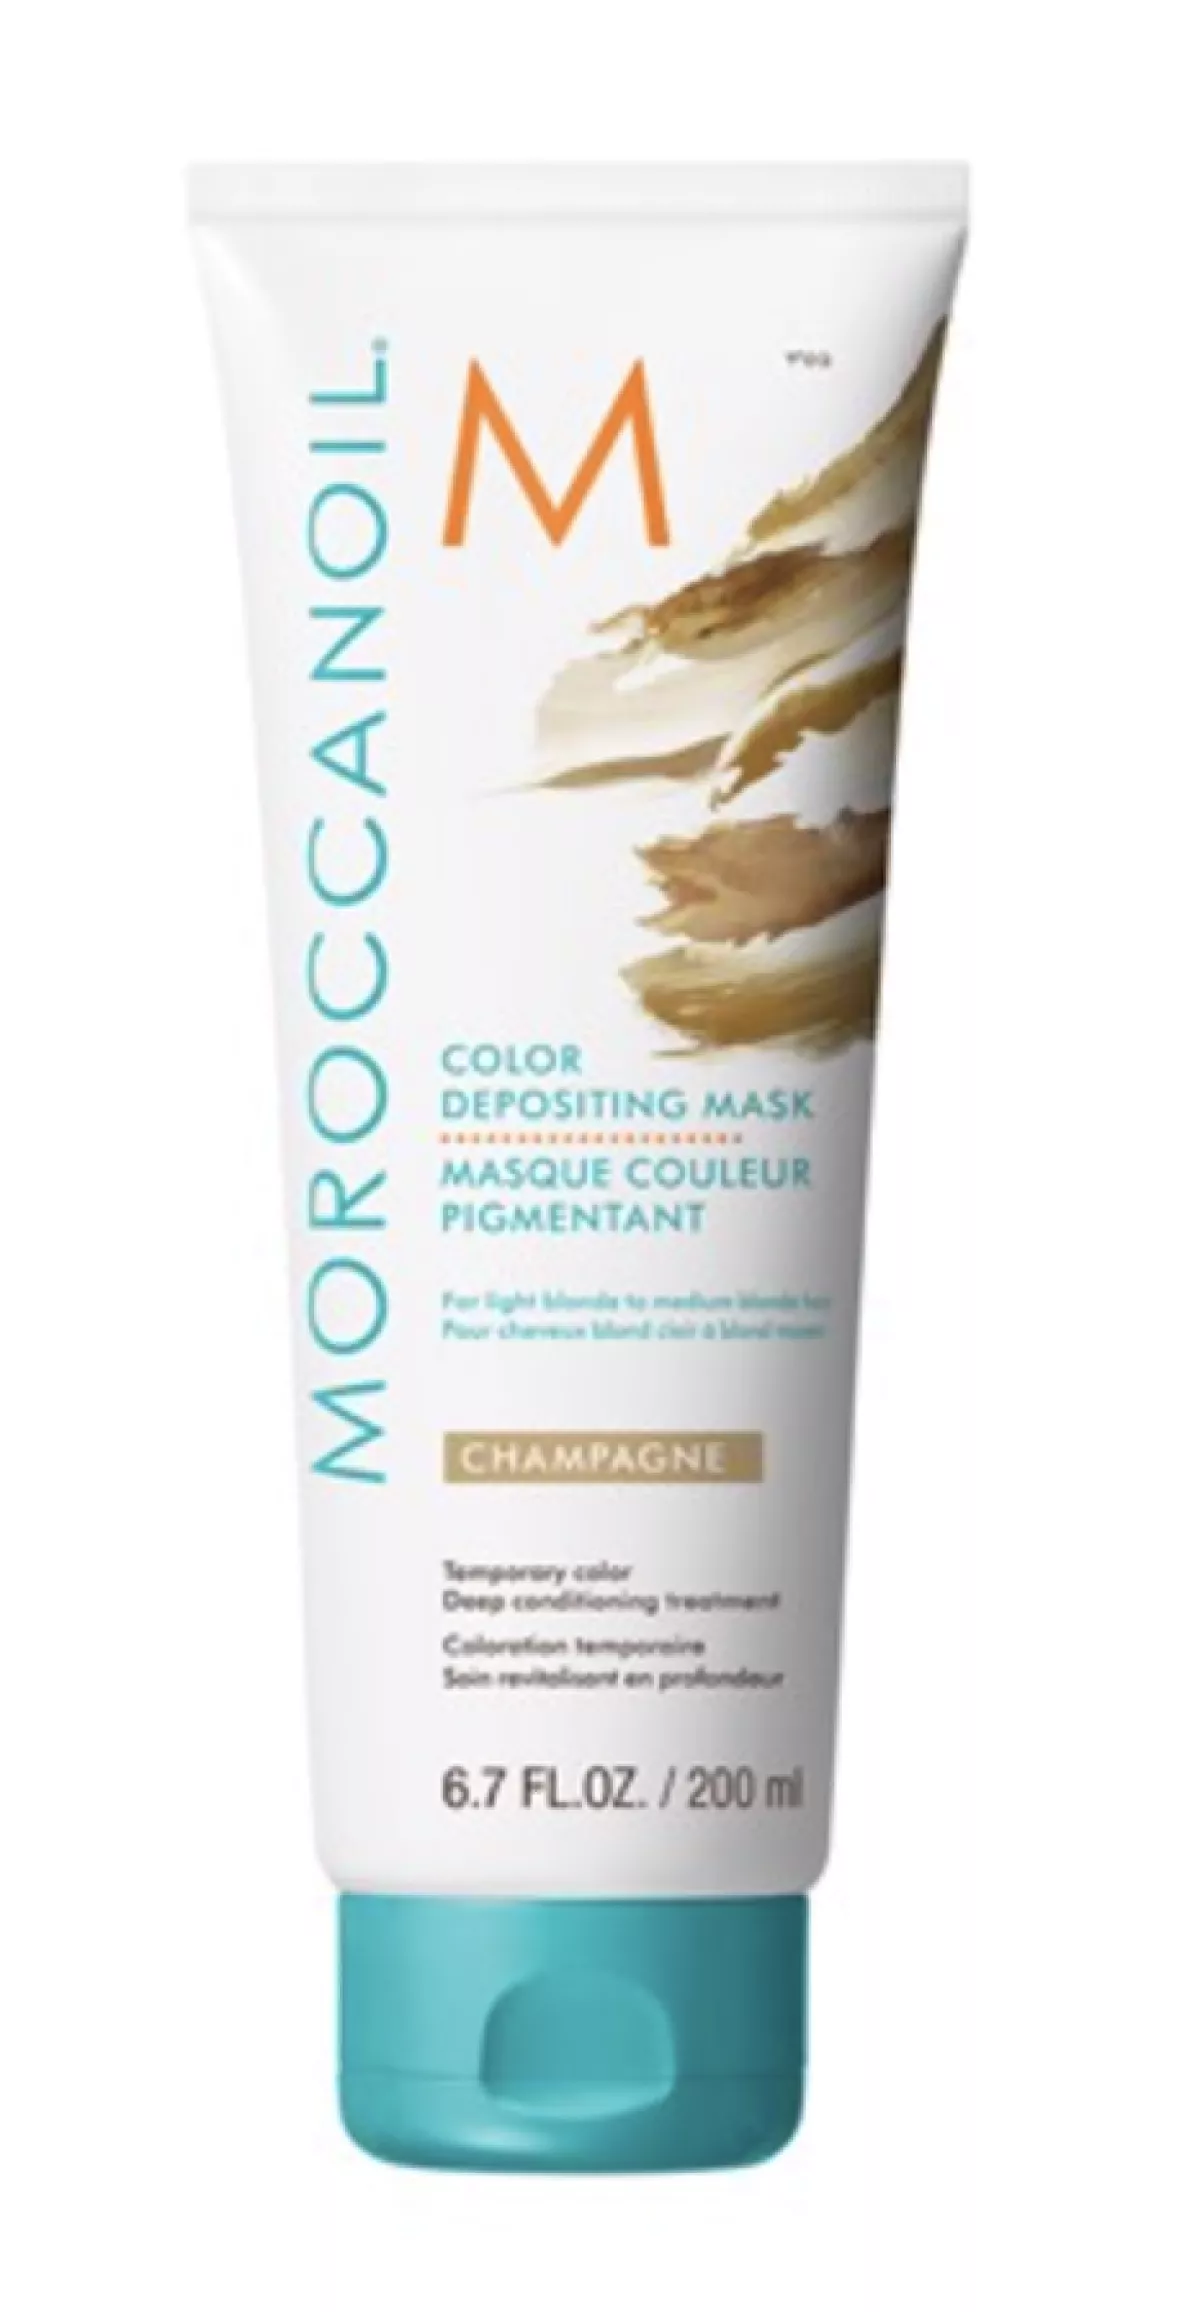 #3 - Moroccanoil Champagne Color Depositing Mask 200 ML